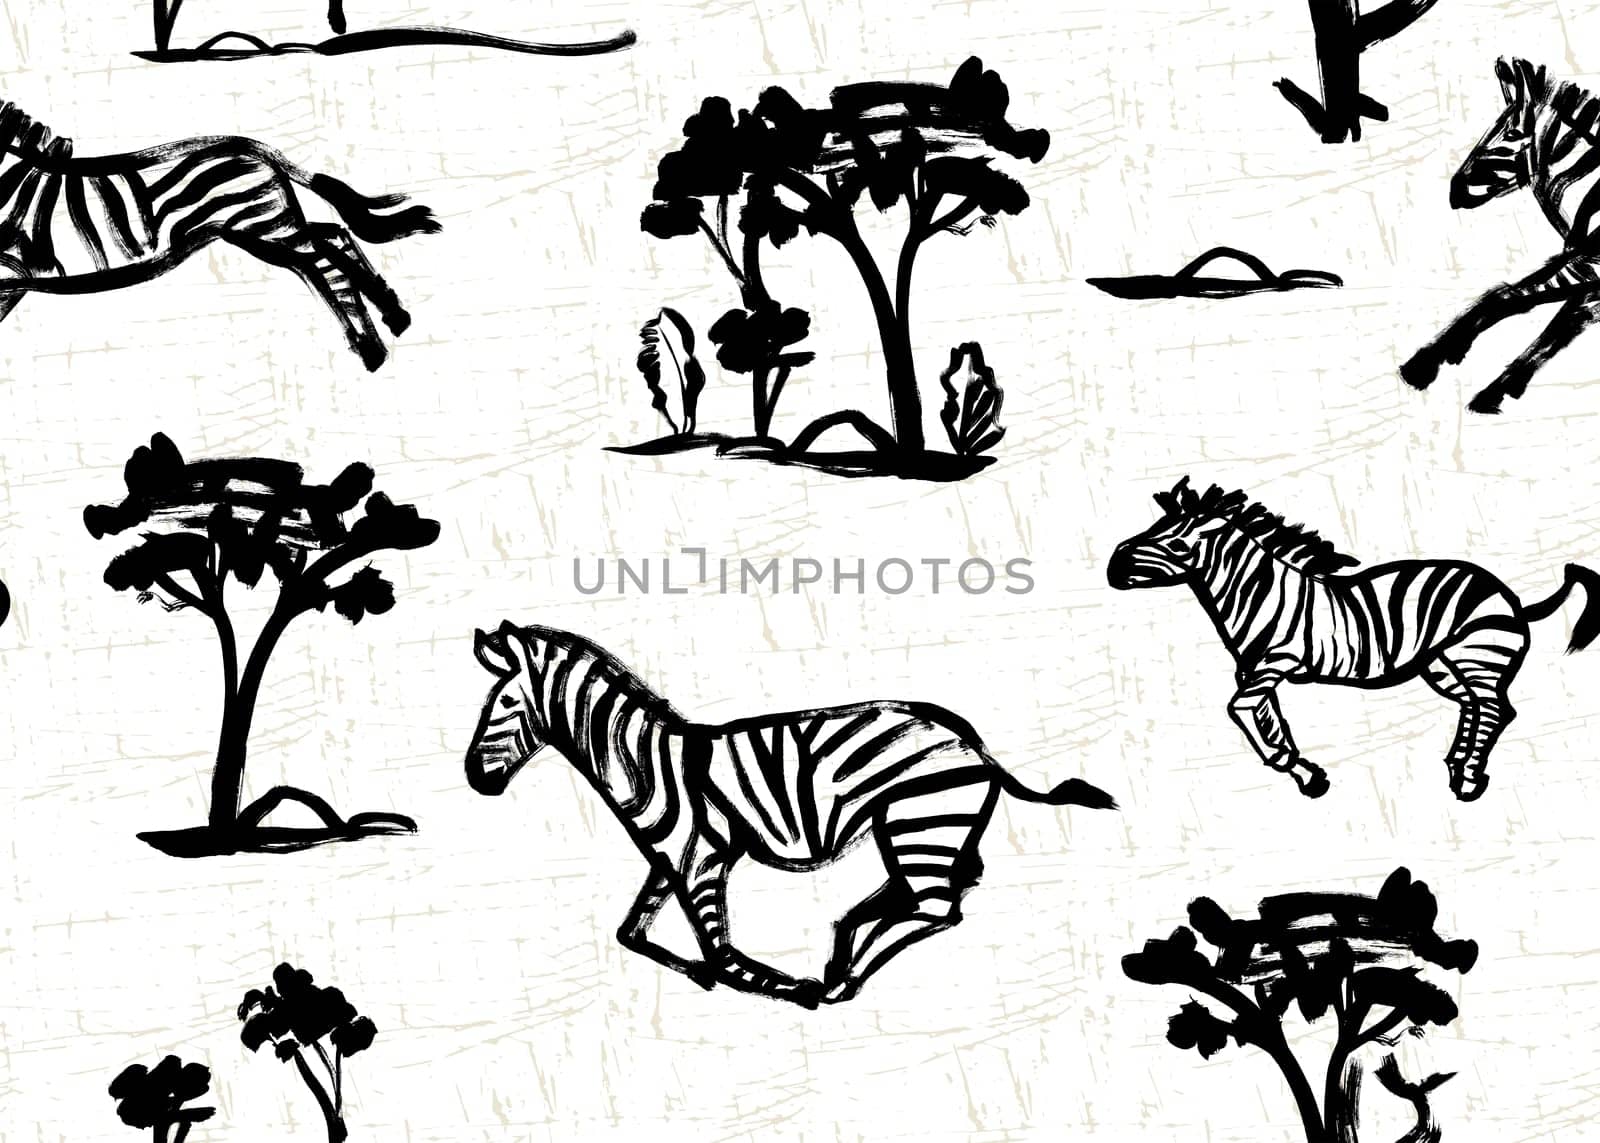 Monochrome pattern with running zebras on the savannah painted in black gouache by MarinaVoyush